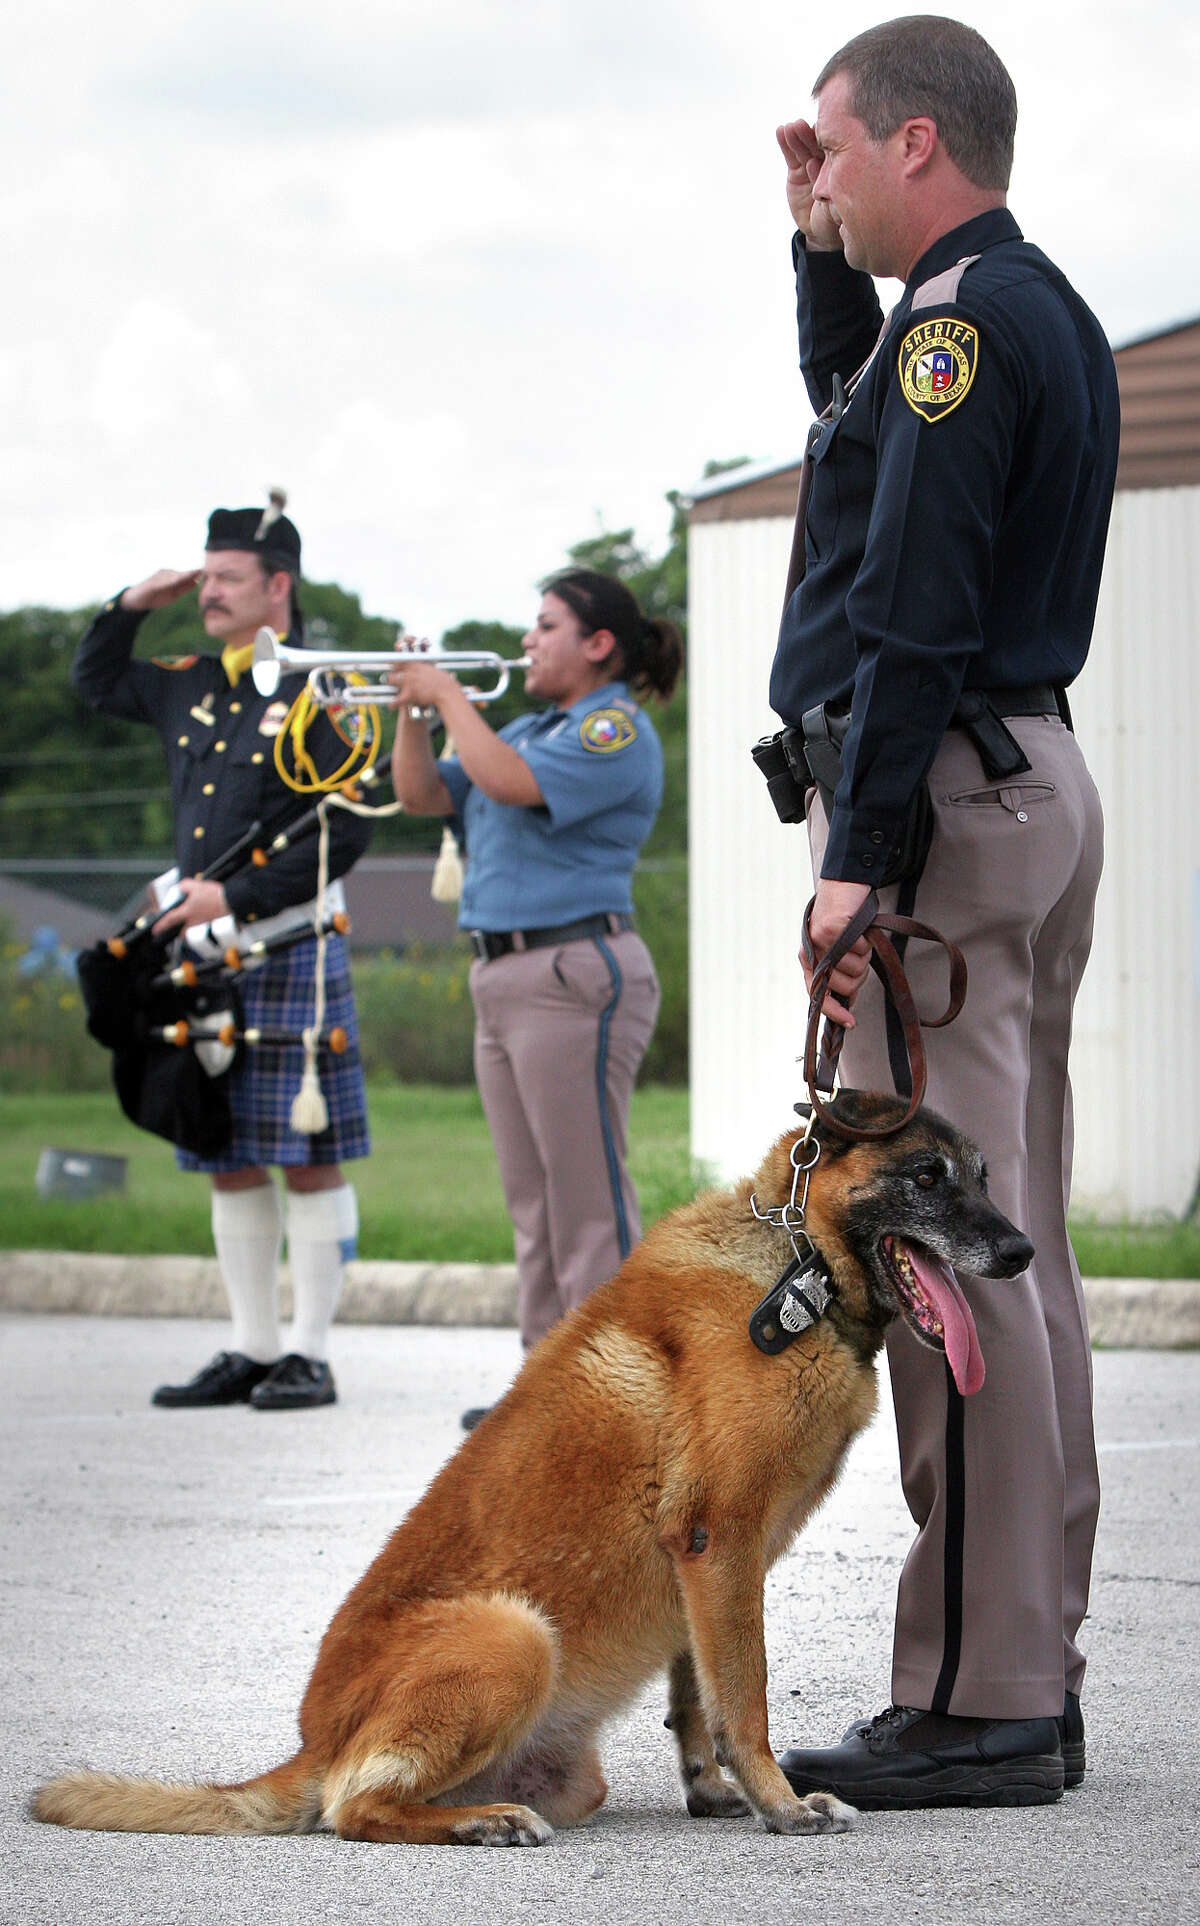 Metro daily - Deputy Steve Benoy, left, of the Bexar County Sheriff K9 Unit salutes as he holds his dog Blitz, as taps are played for Andor, badge number 007, who was retired today during a memorial service after passing away June 27, 2007, Friday, July 6, 2007.